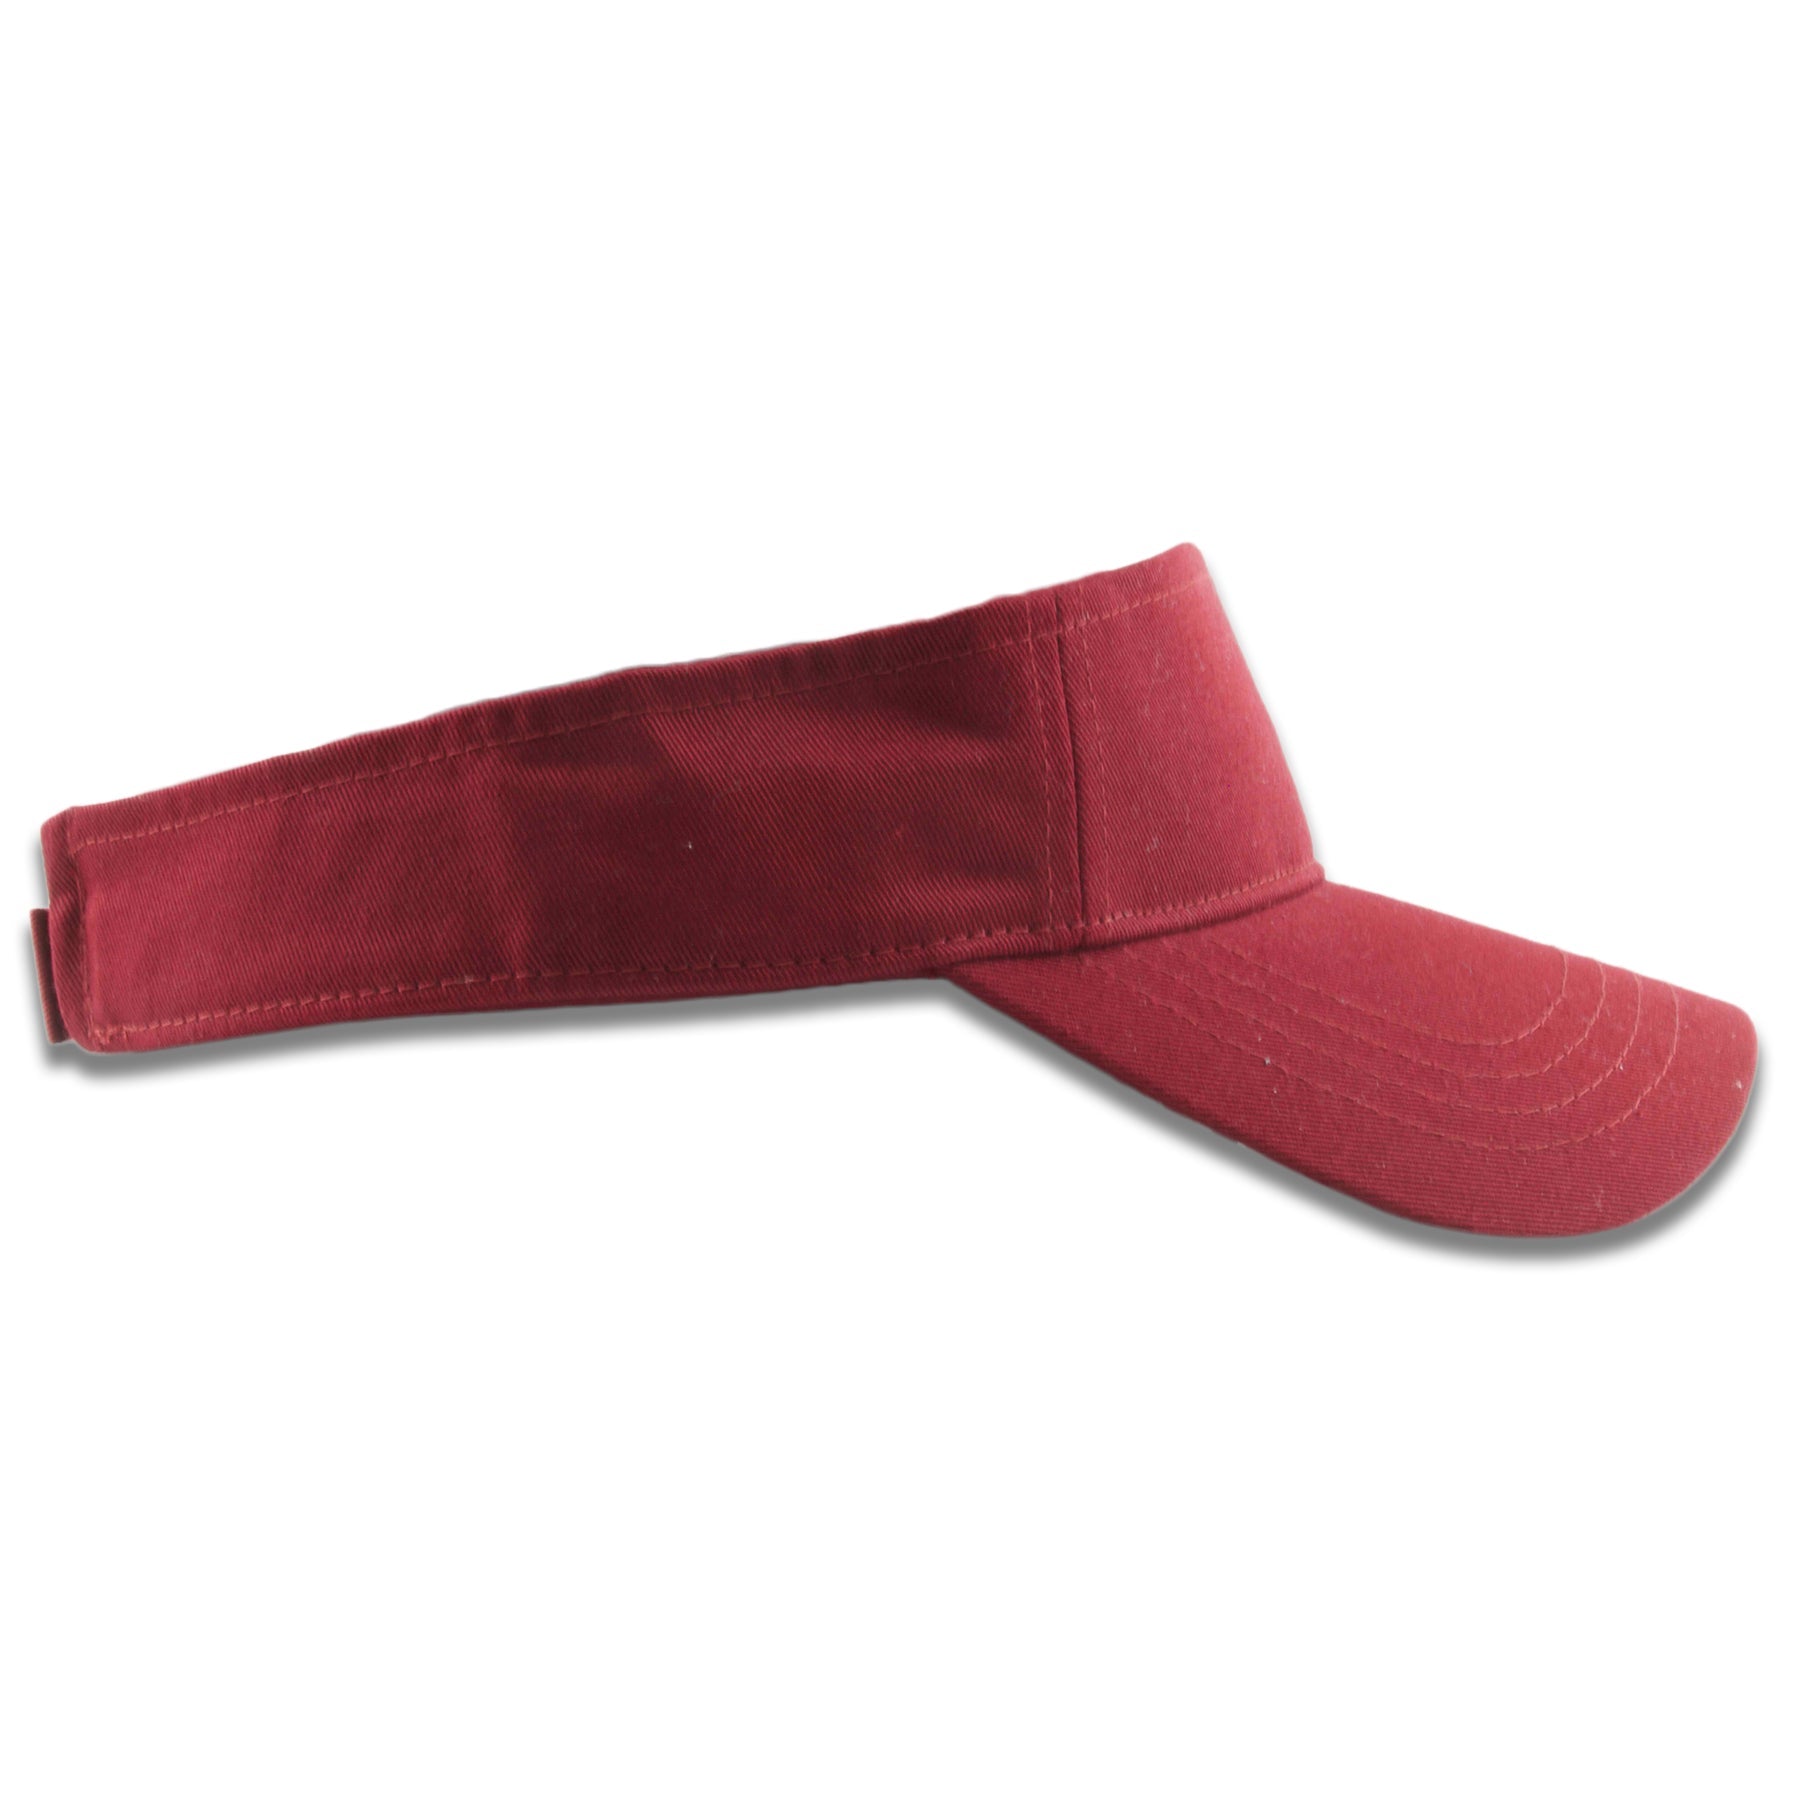 The burgundy visor is completely blank and features no added logos